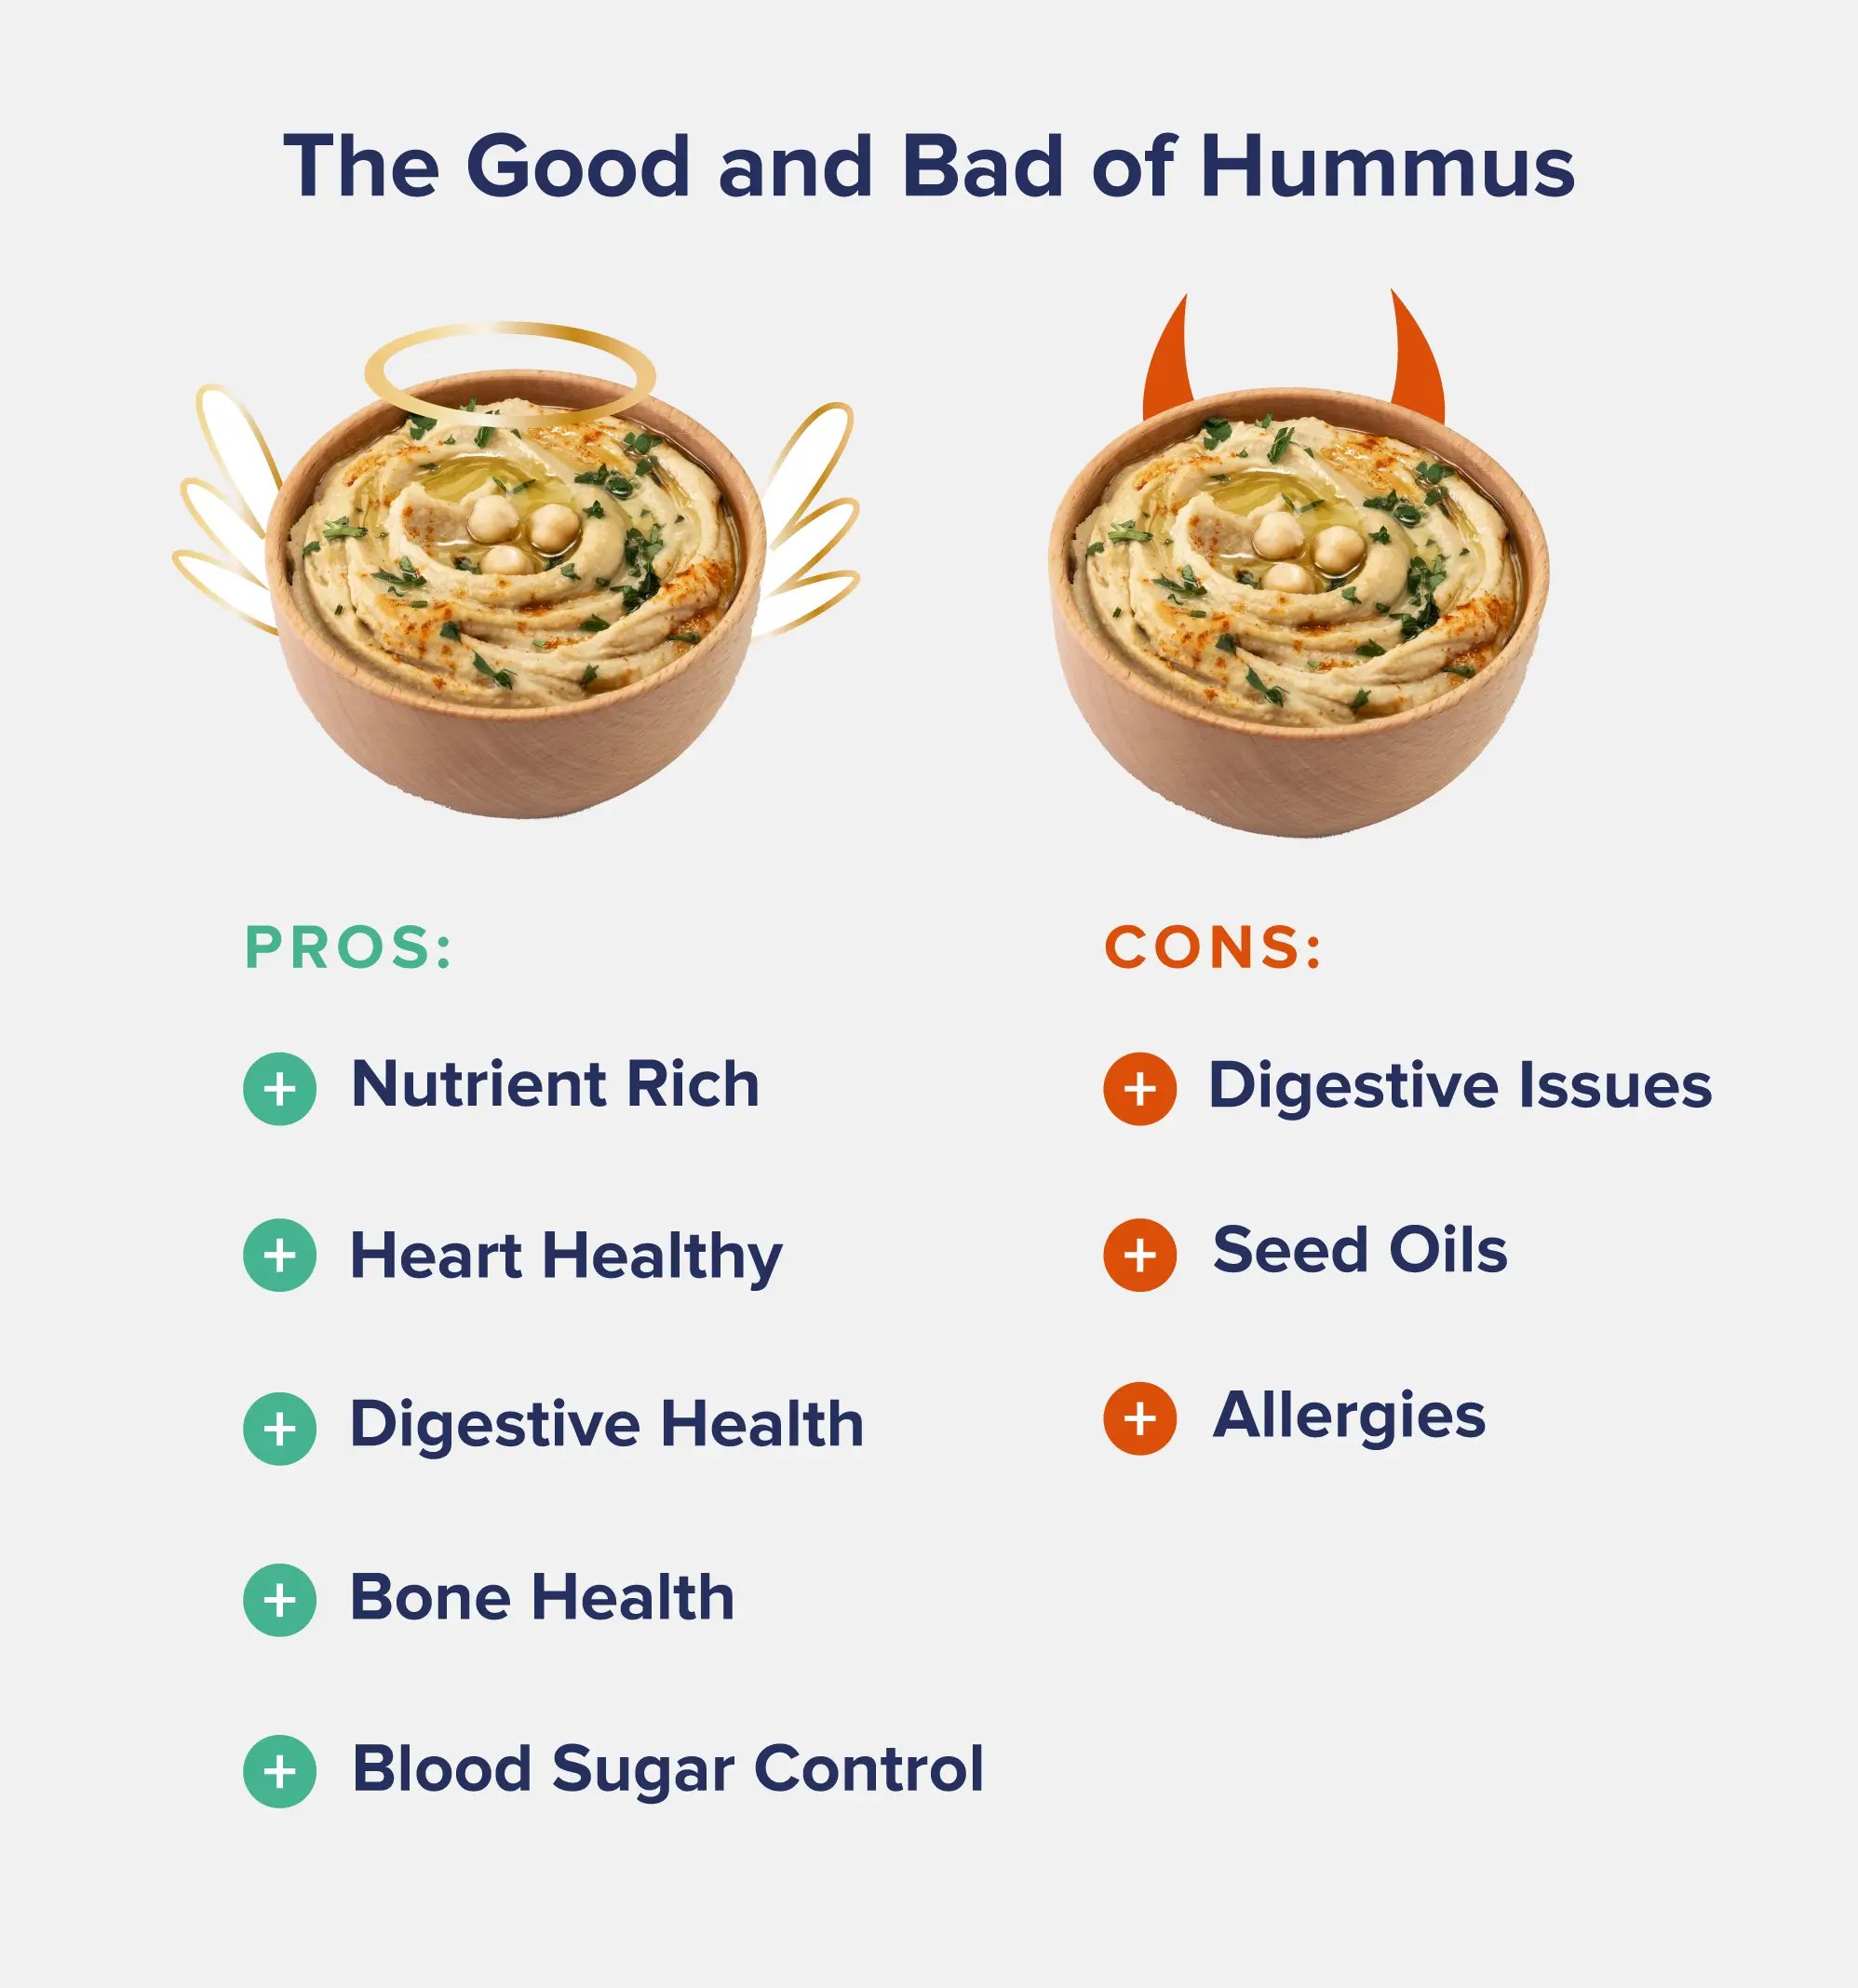 A graphic entitled "The Good and Bad of Hummus" depicting two bowls of hummus (one with a halo and the other with devil's horns) along with a corresponding pros and cons list